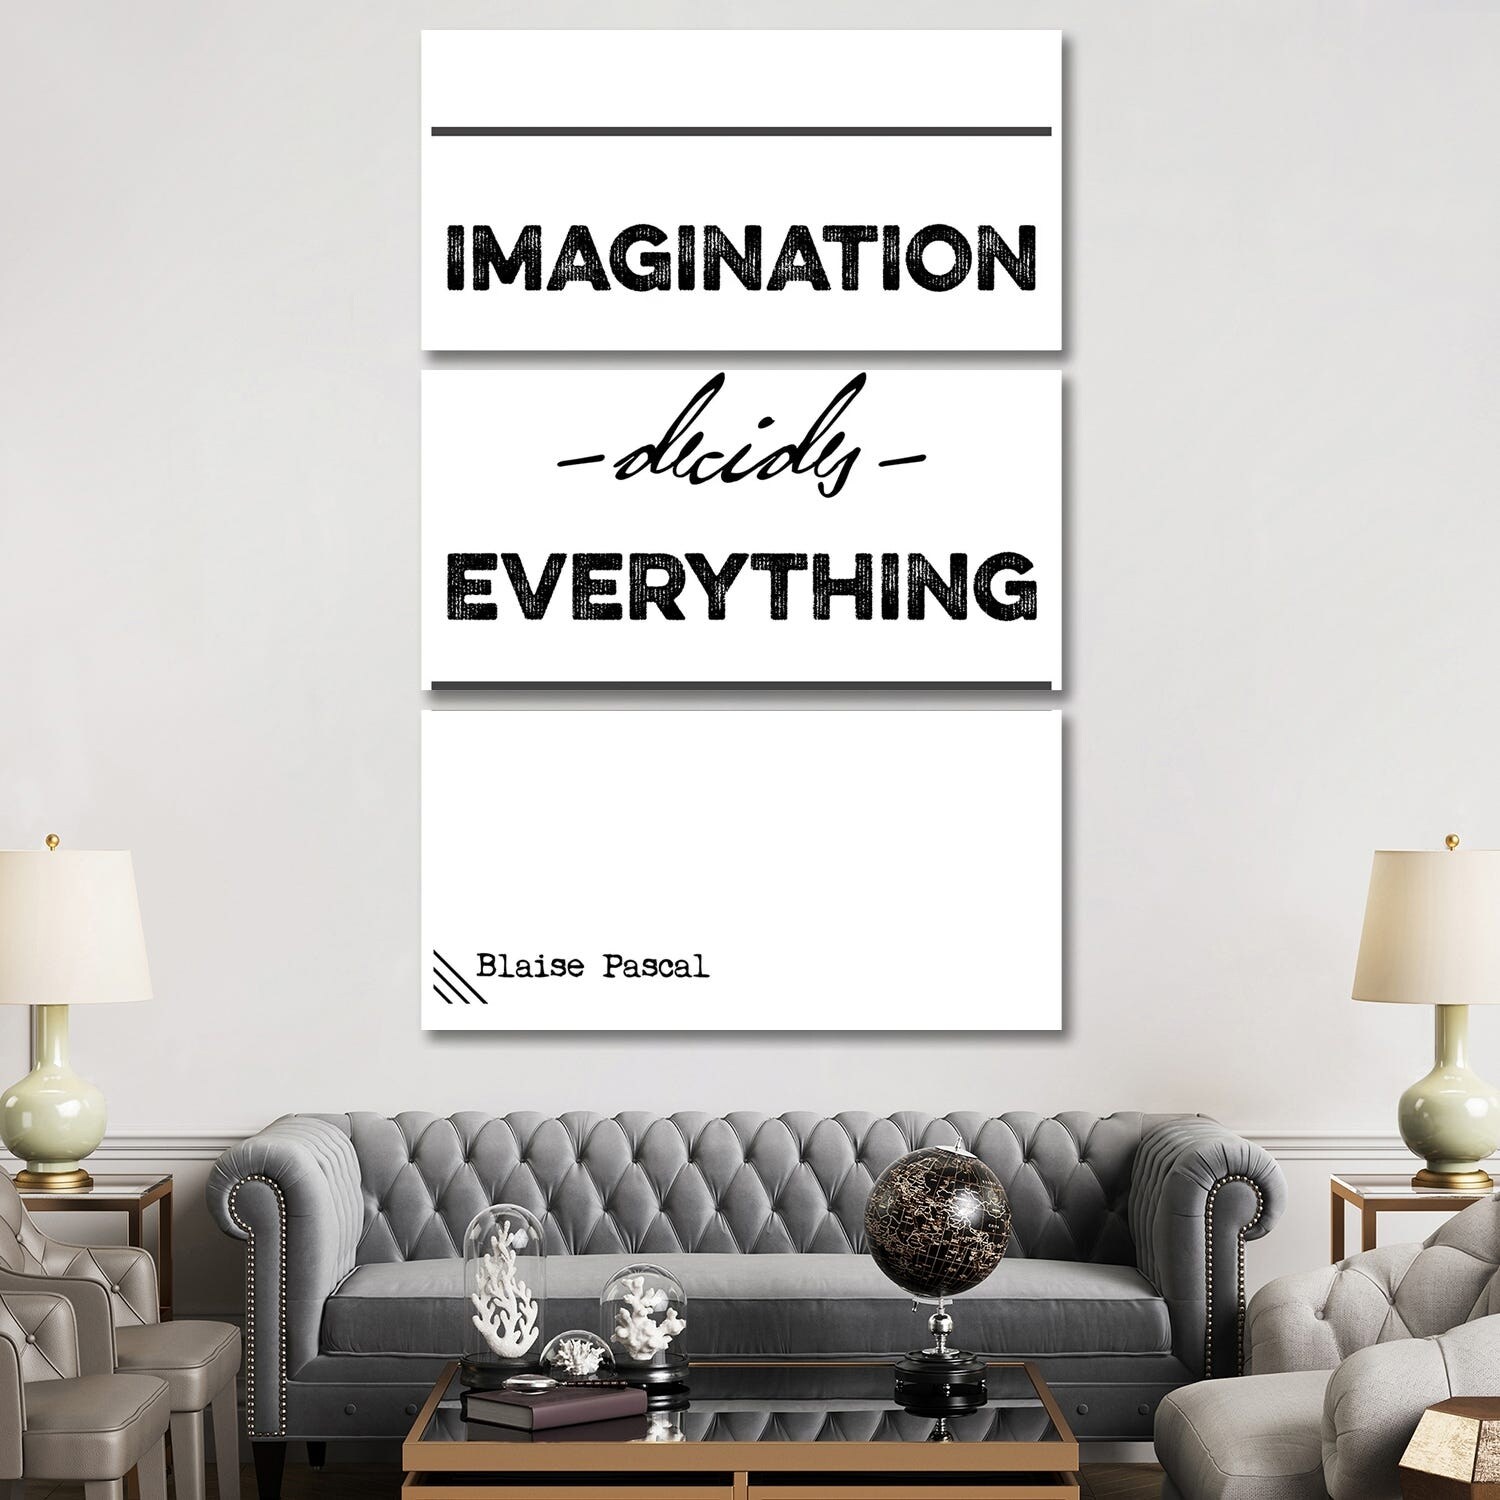 iCanvas Imagination Decide Everything - Blaise Pascal Quote by Nordic  Print Studio 3-Piece Canvas Wall Art Set - On Sale - Bed Bath & Beyond -  35589010